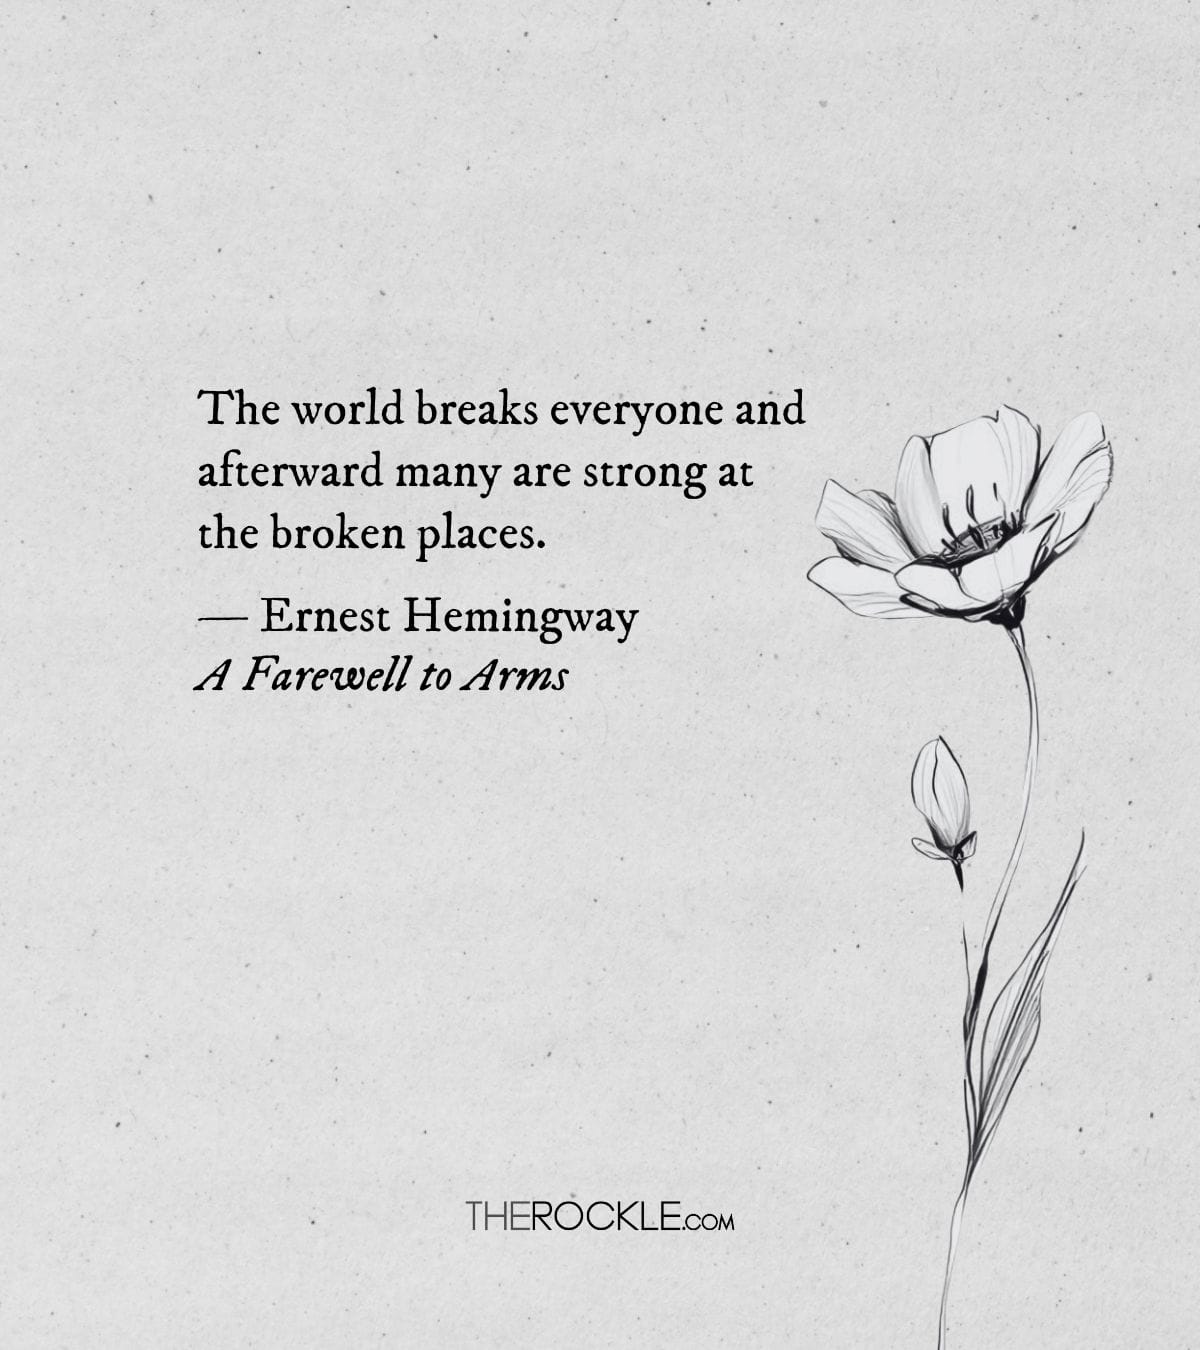 Hemingway's quote about resilience